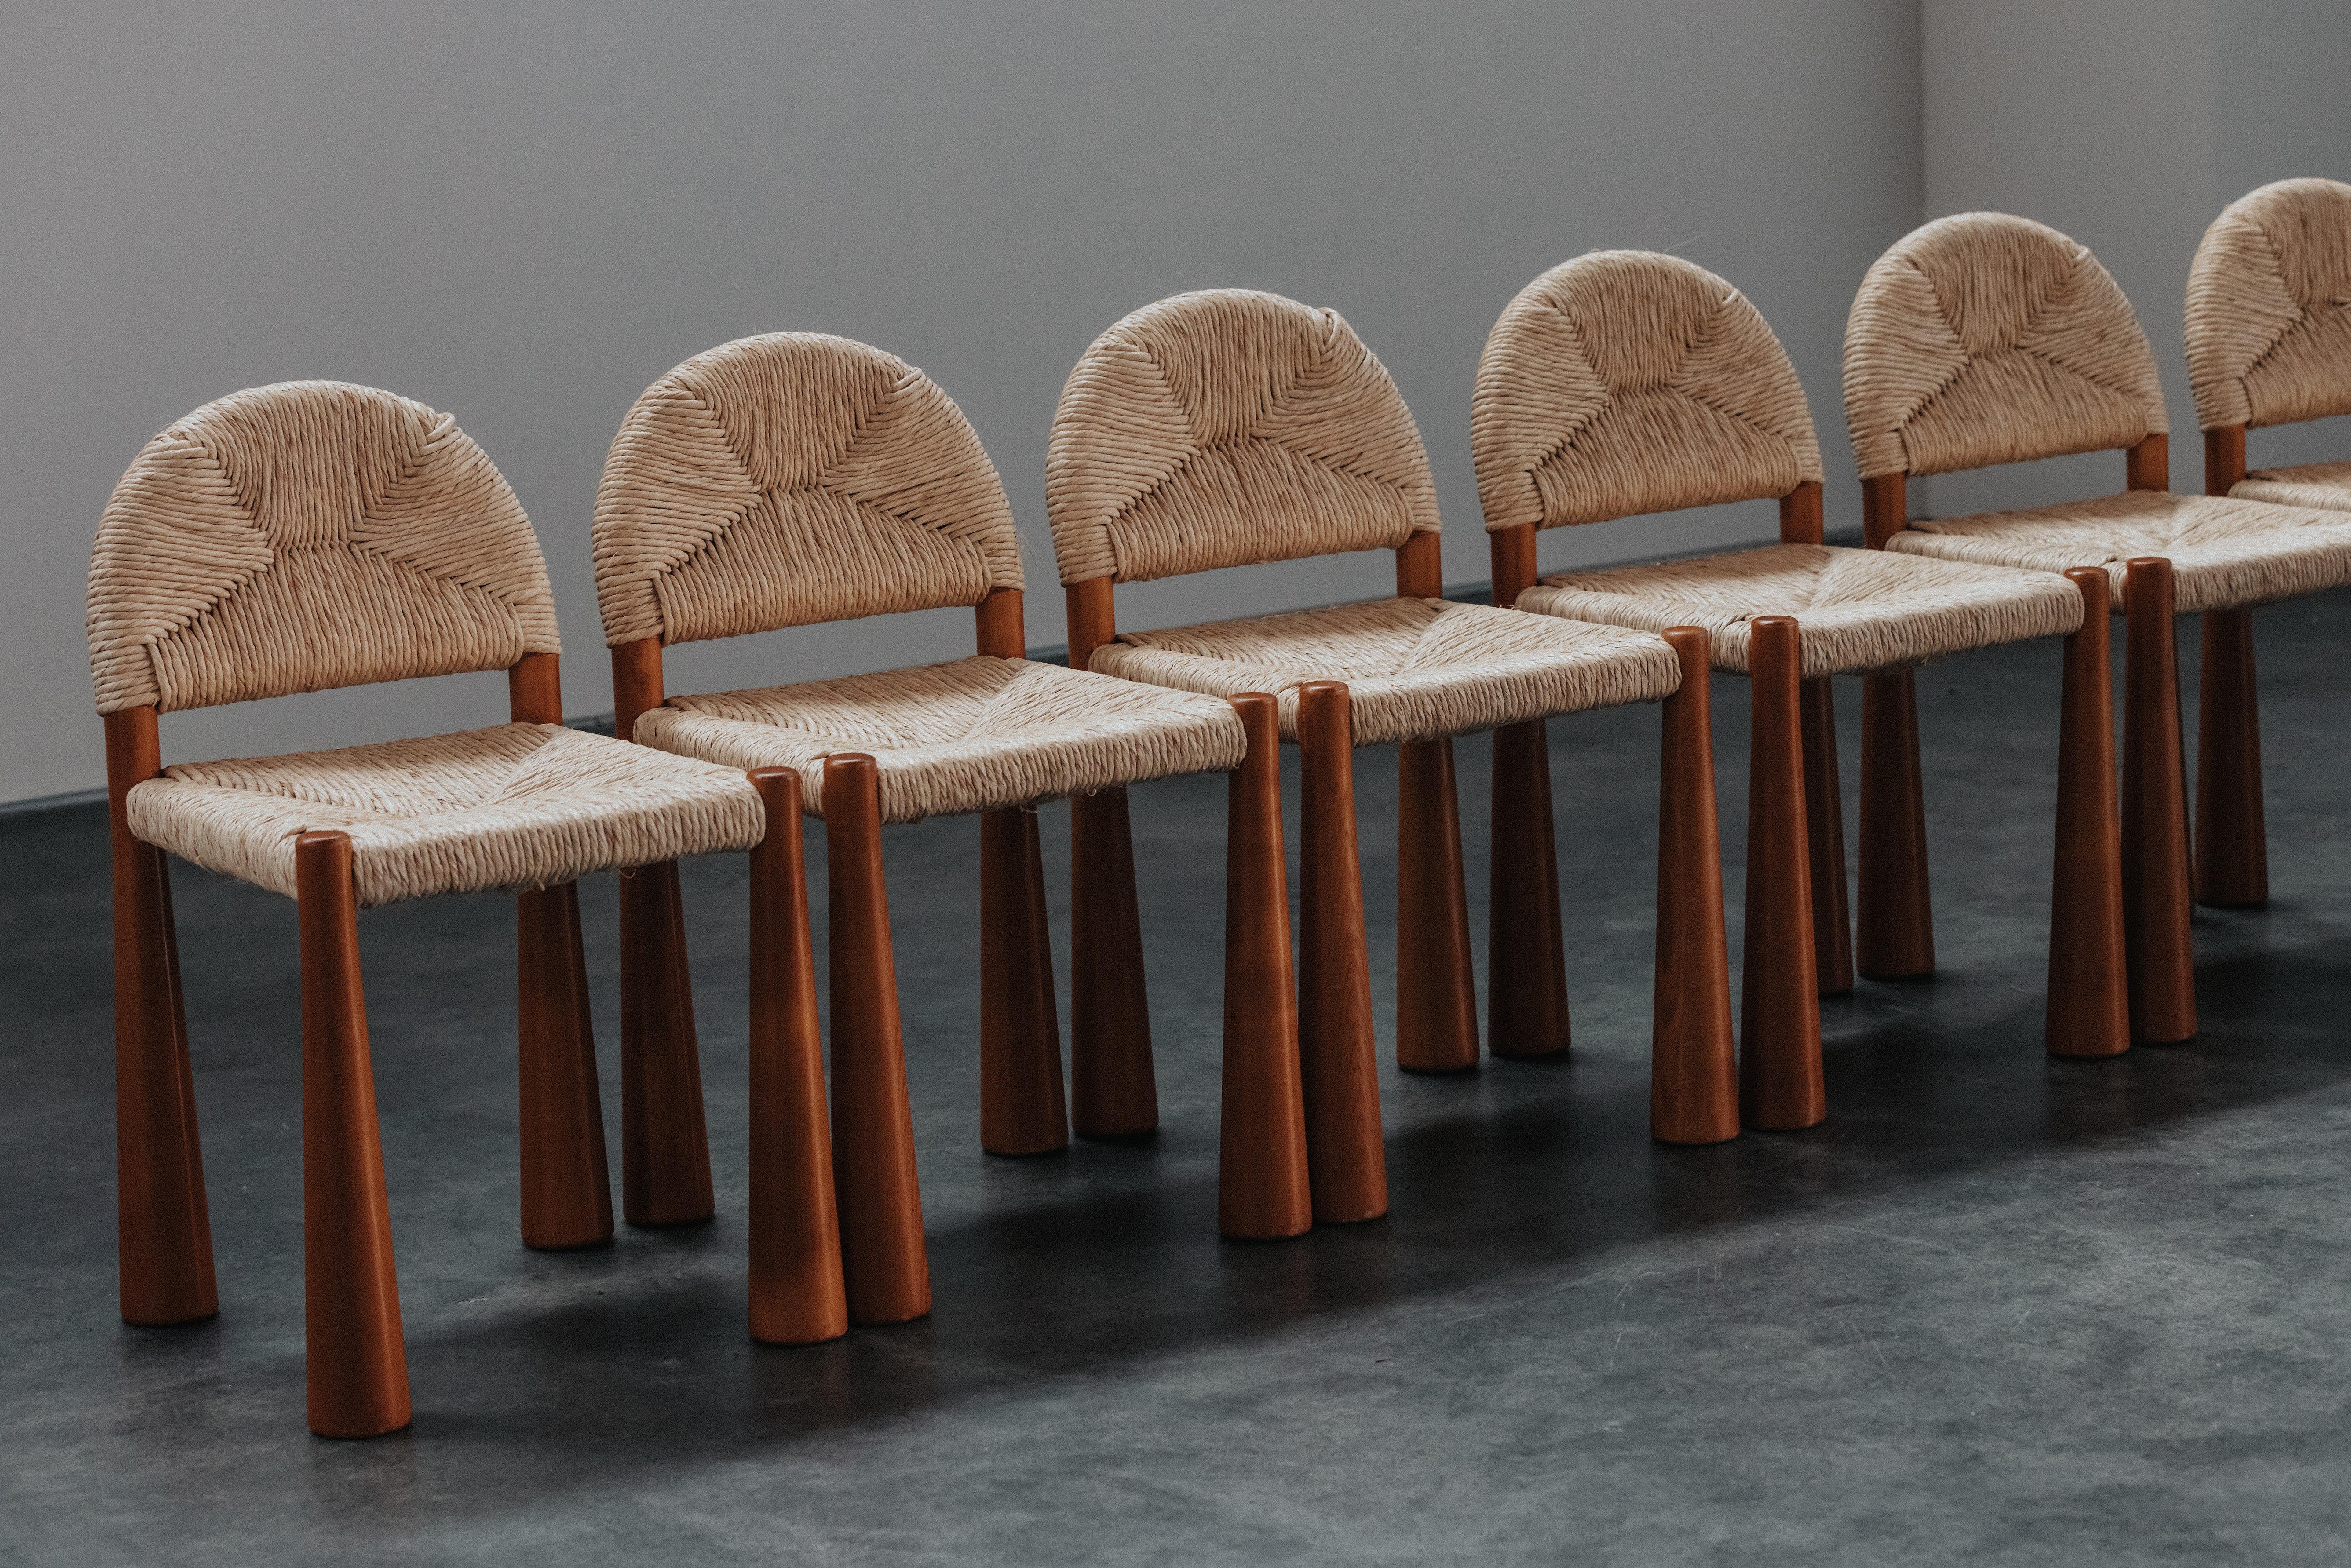 Vintage Set Of Six Dining Chairs by Alessandro Becchi for Giovanetti, Italy 1970.  Rare set of pine chairs with woven seats.  Light wear and use.